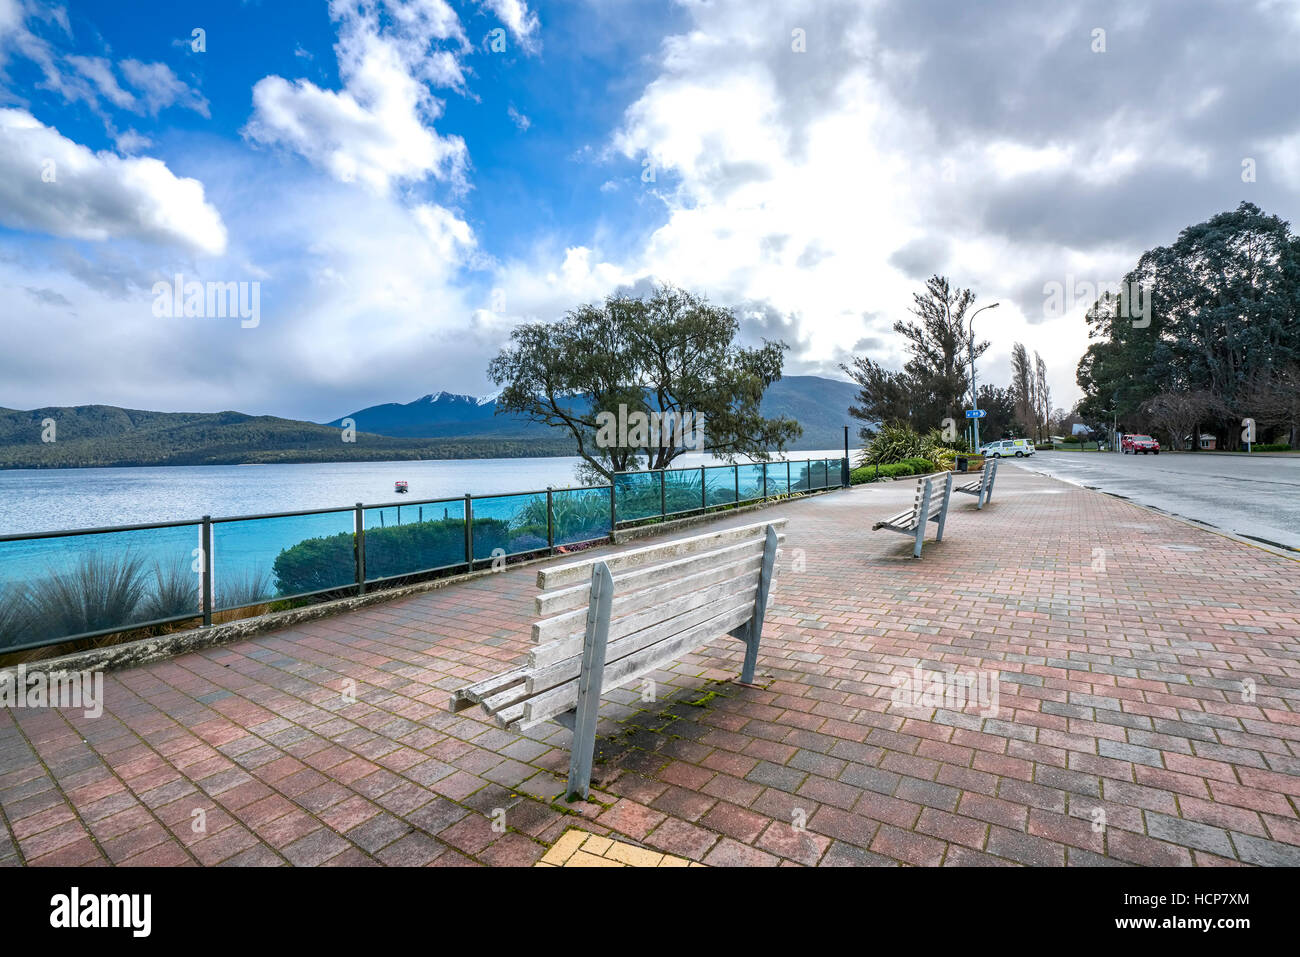 A row of wooden brench in front of Te anau lake, New Zealand Stock Photo